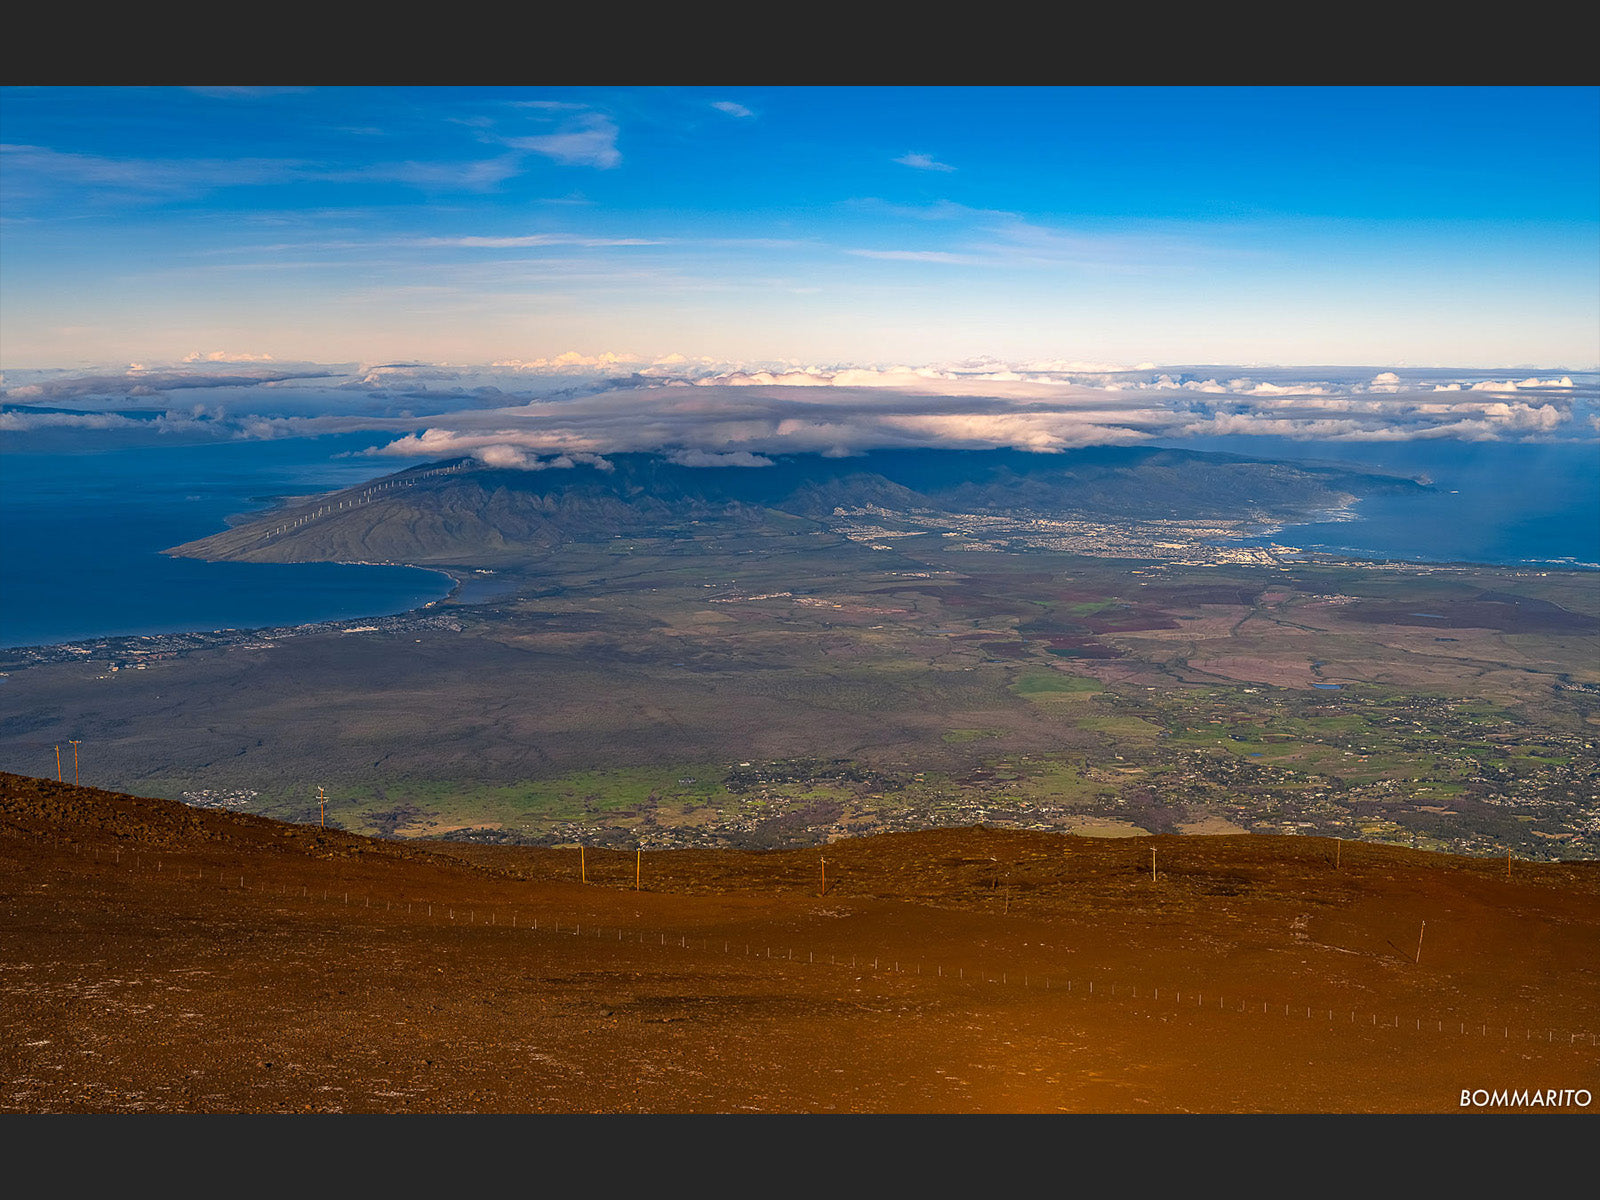 Maui from Above